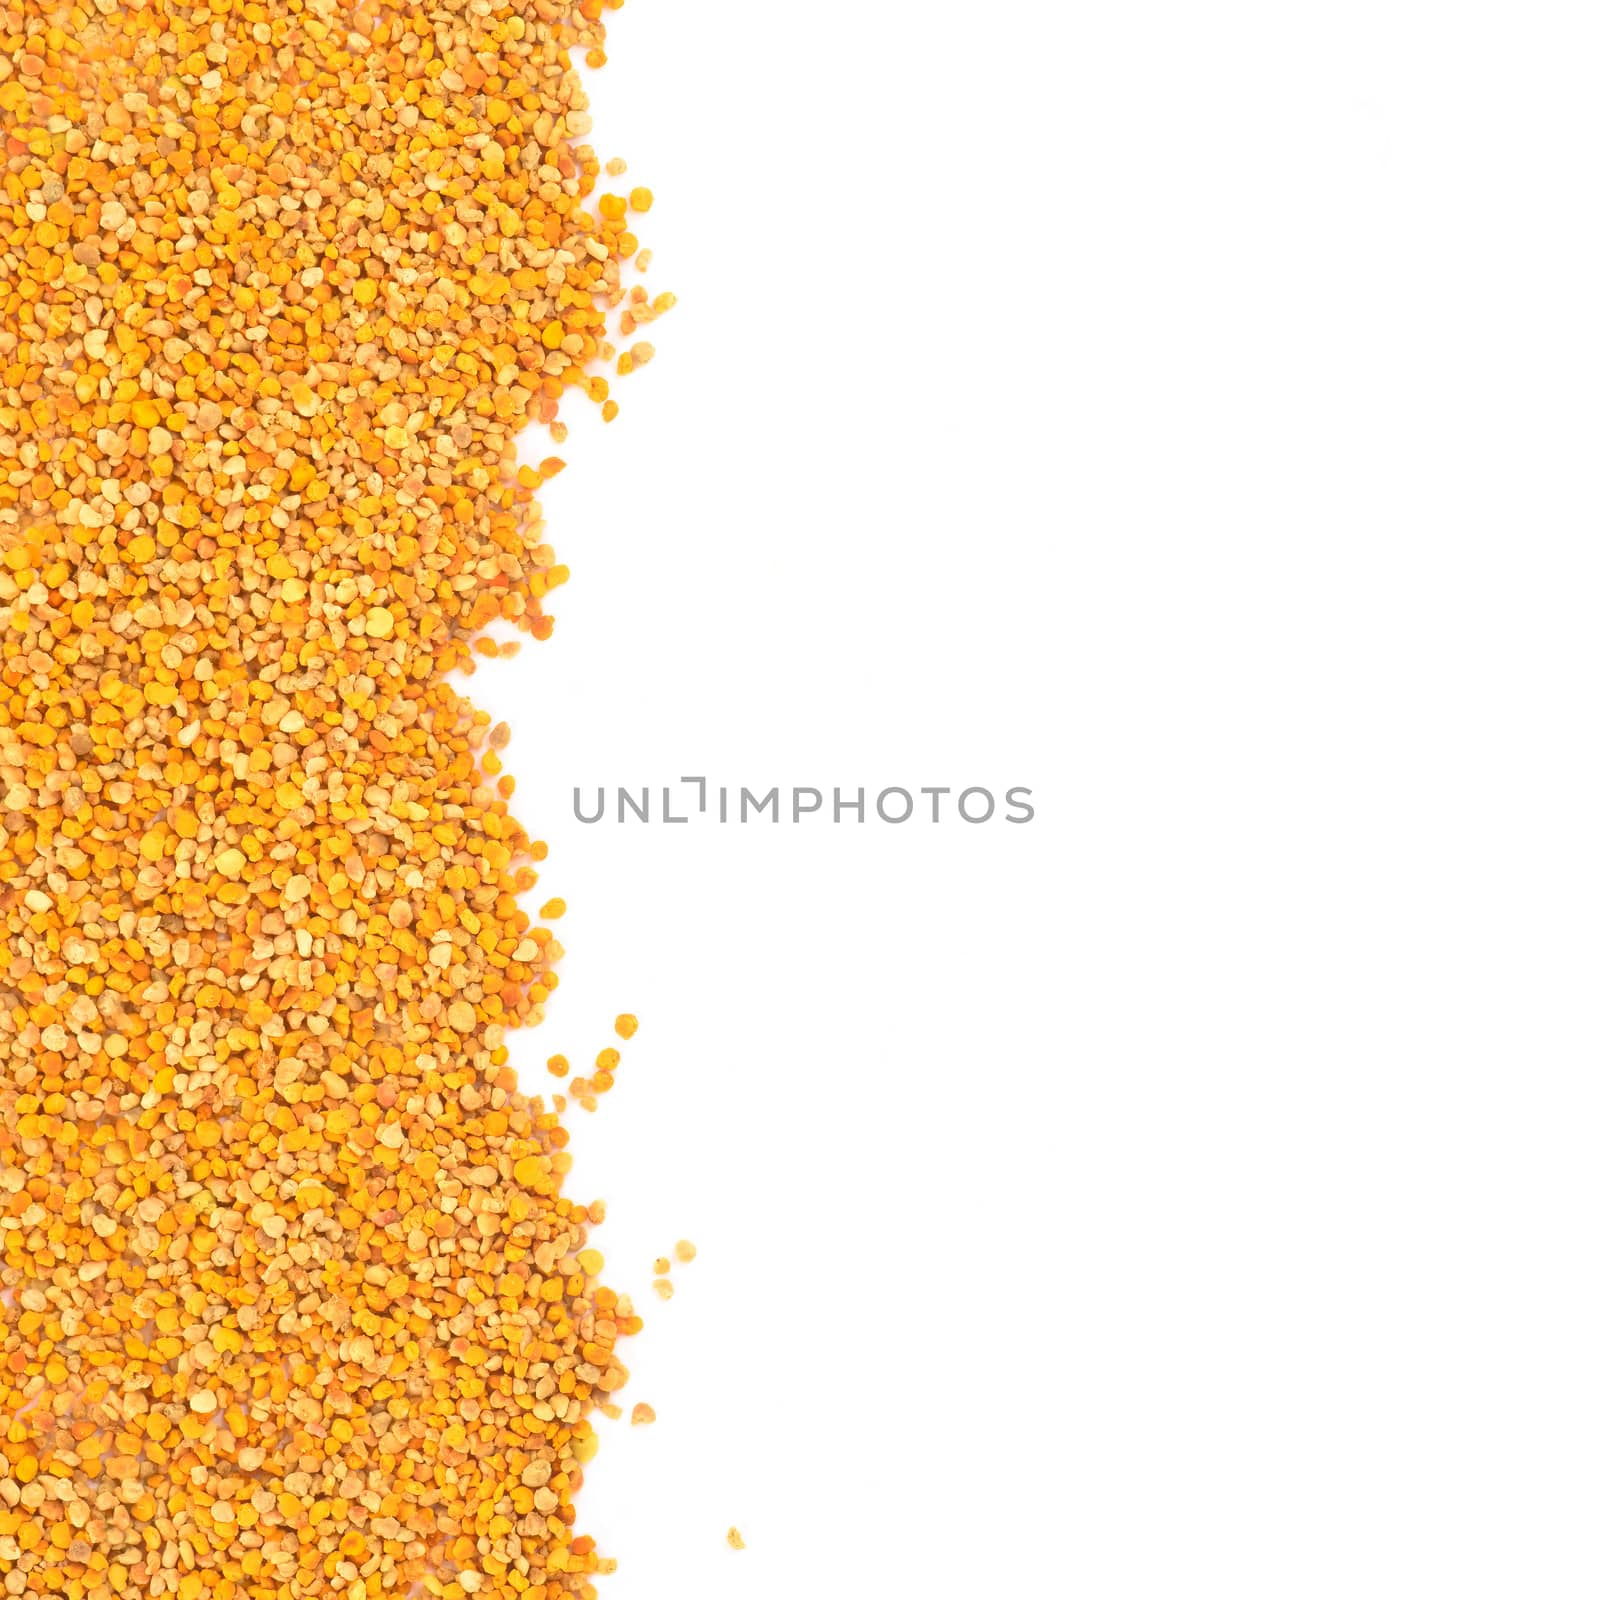 Bee pollen grains with blank space for text